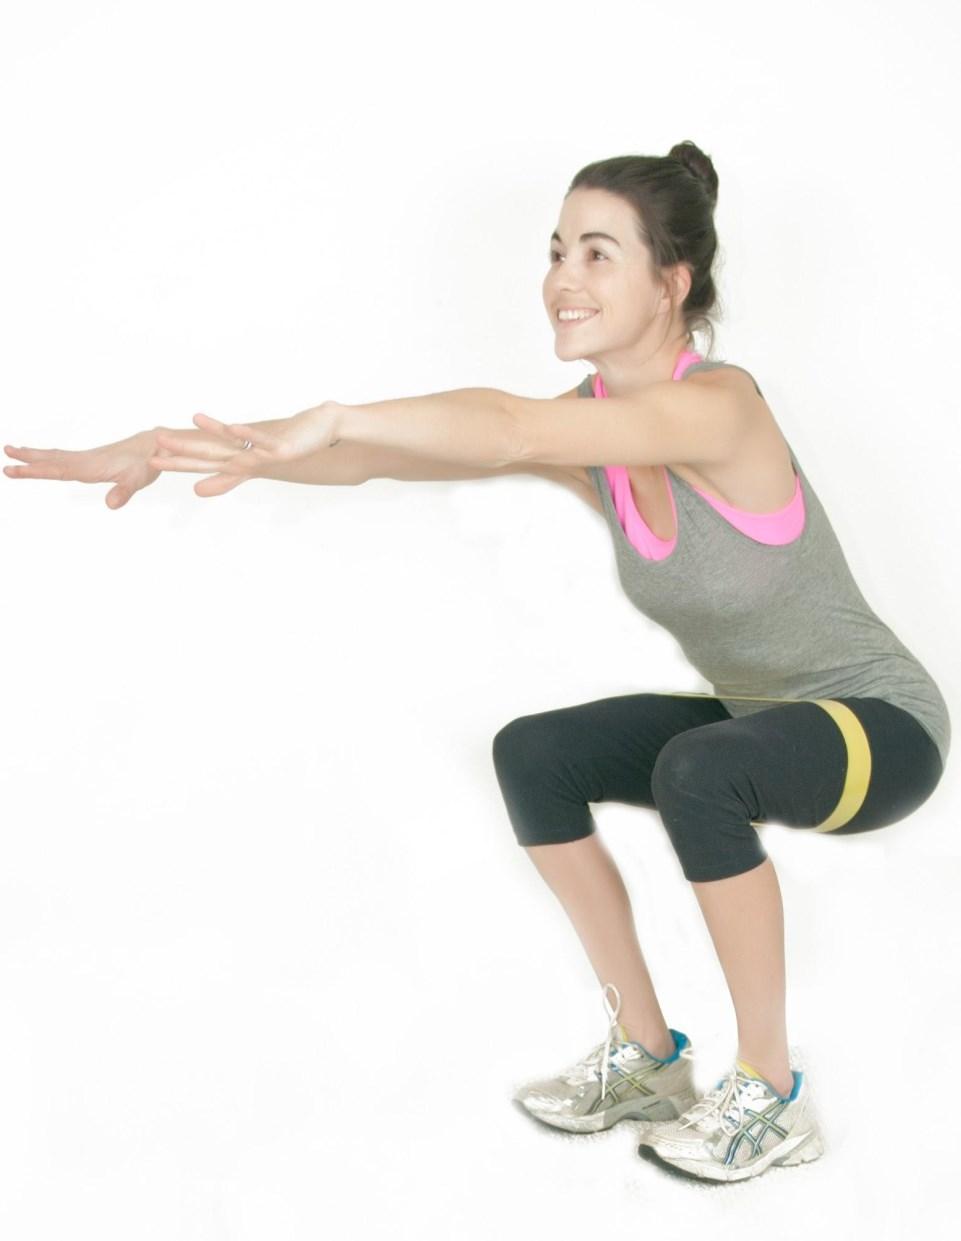 CLOSED CHAIN EXERCISES (IN STANDING) SQUAT (BEGINNER) Step 1: Place the resistance band around your thighs, just above your knees.